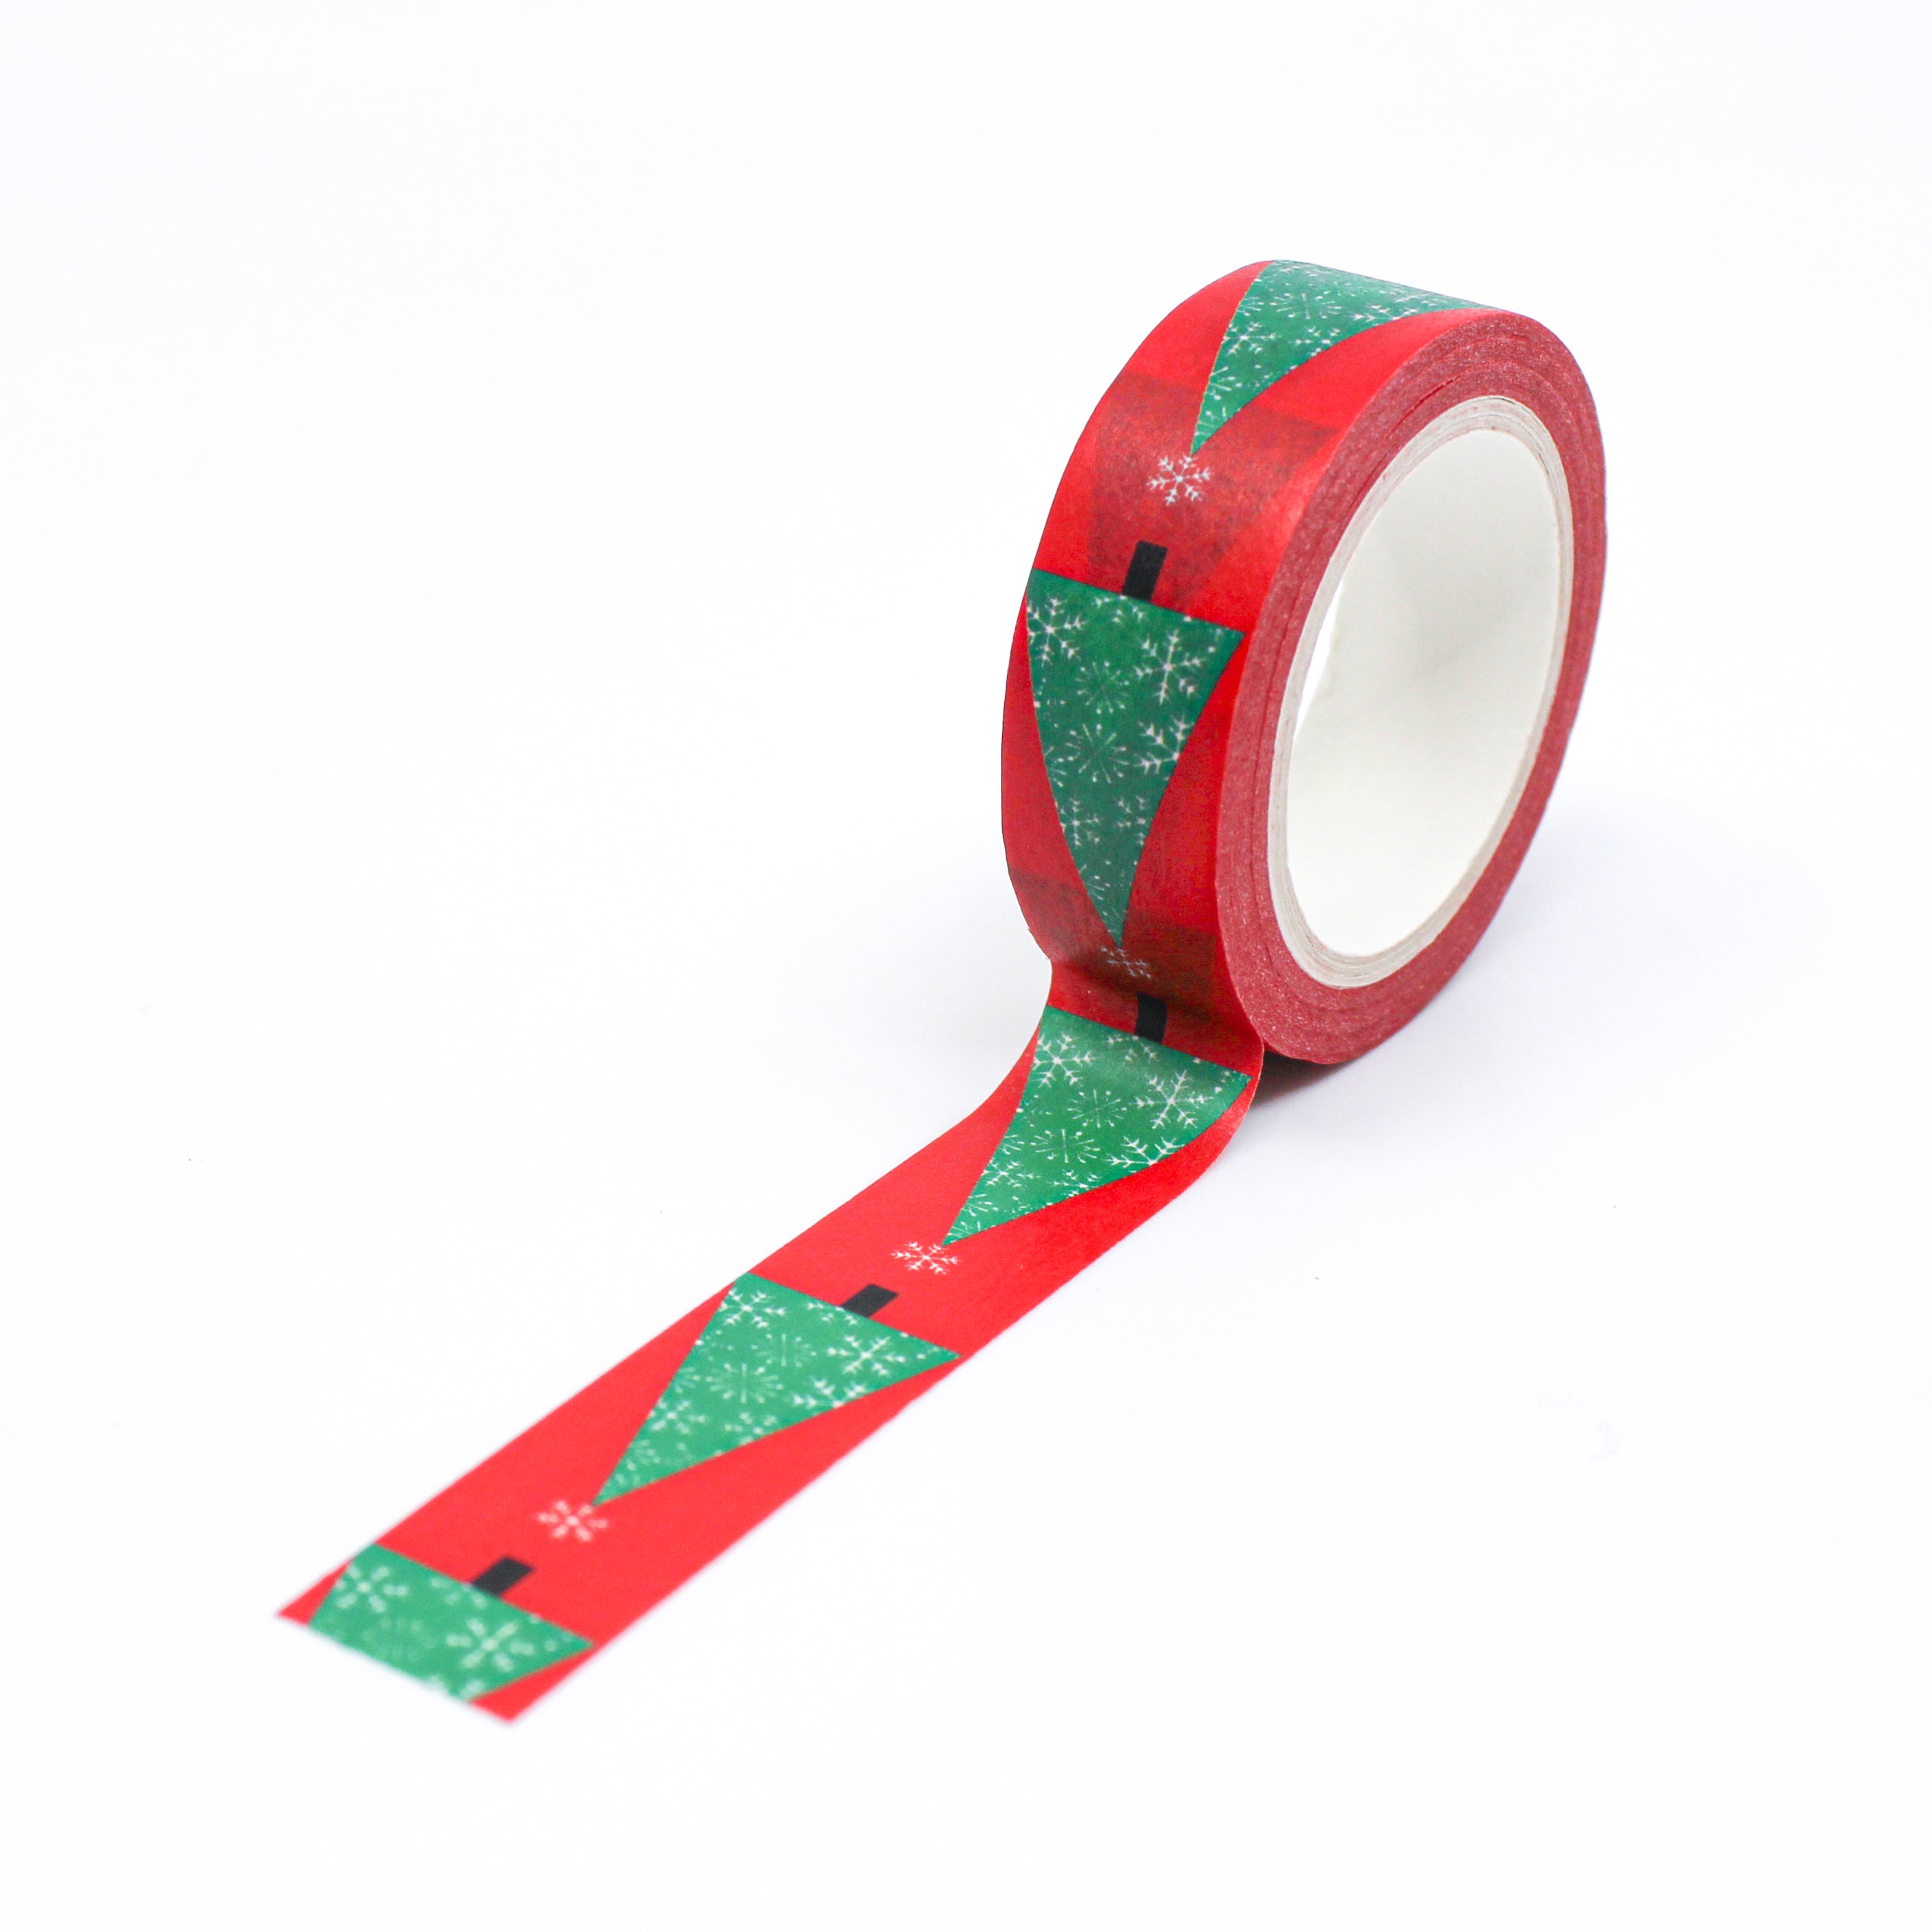 This fun modern take on a Christmas tree is a great holiday washi tape from BBB Supplies.